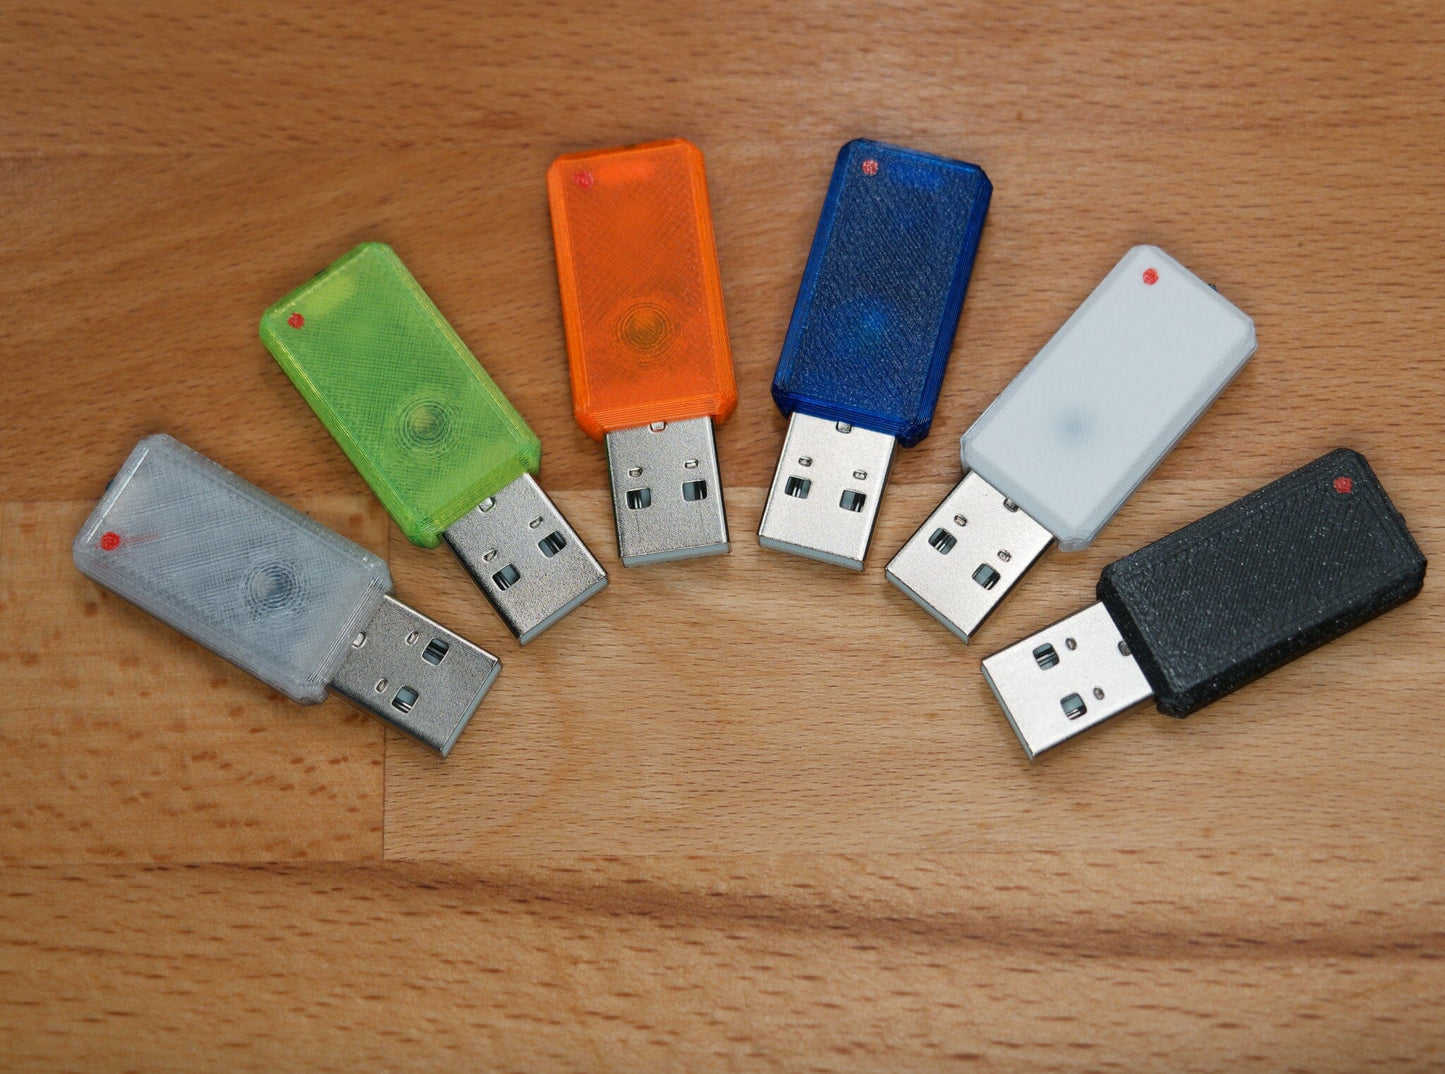 6 USB Novas with different colored cases. In transparent, green, orange, blue, white, black.